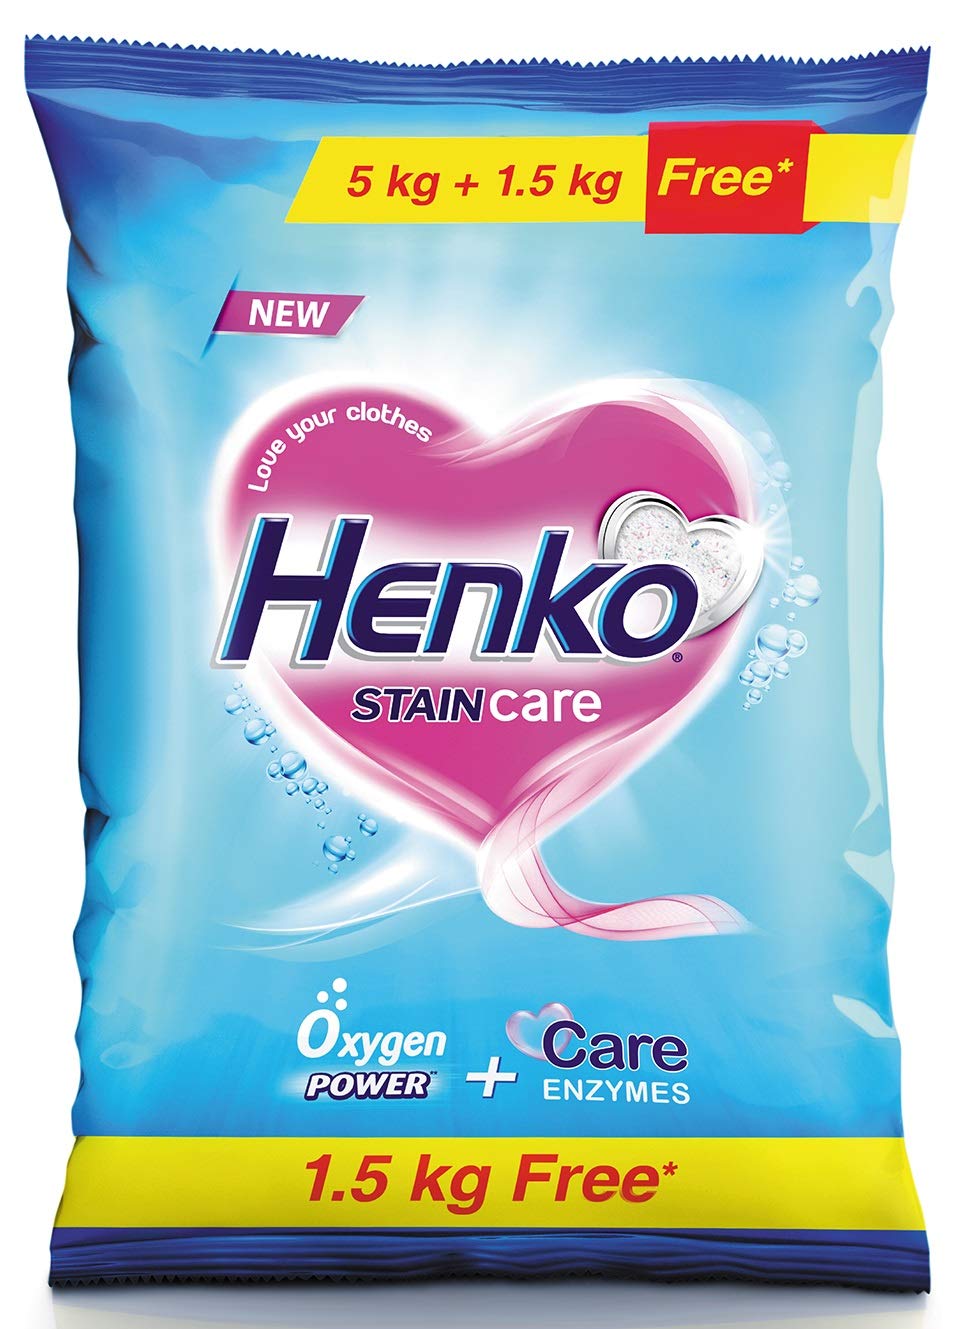 Henko Stain Care Powder - 5kg with 1.5kg Free